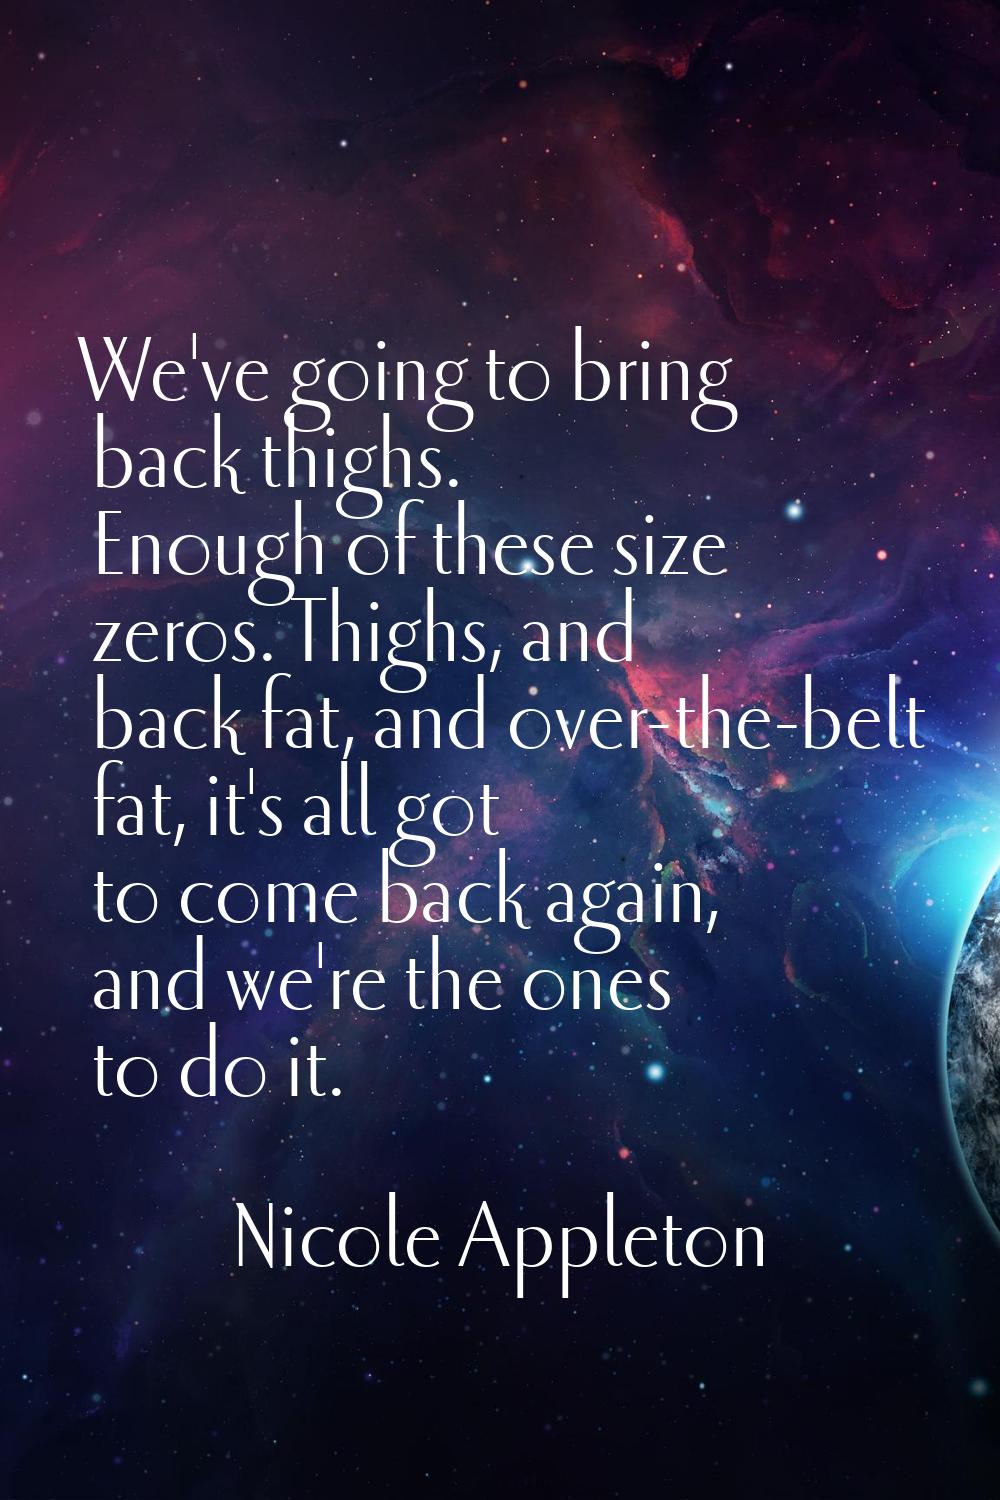 We've going to bring back thighs. Enough of these size zeros. Thighs, and back fat, and over-the-be